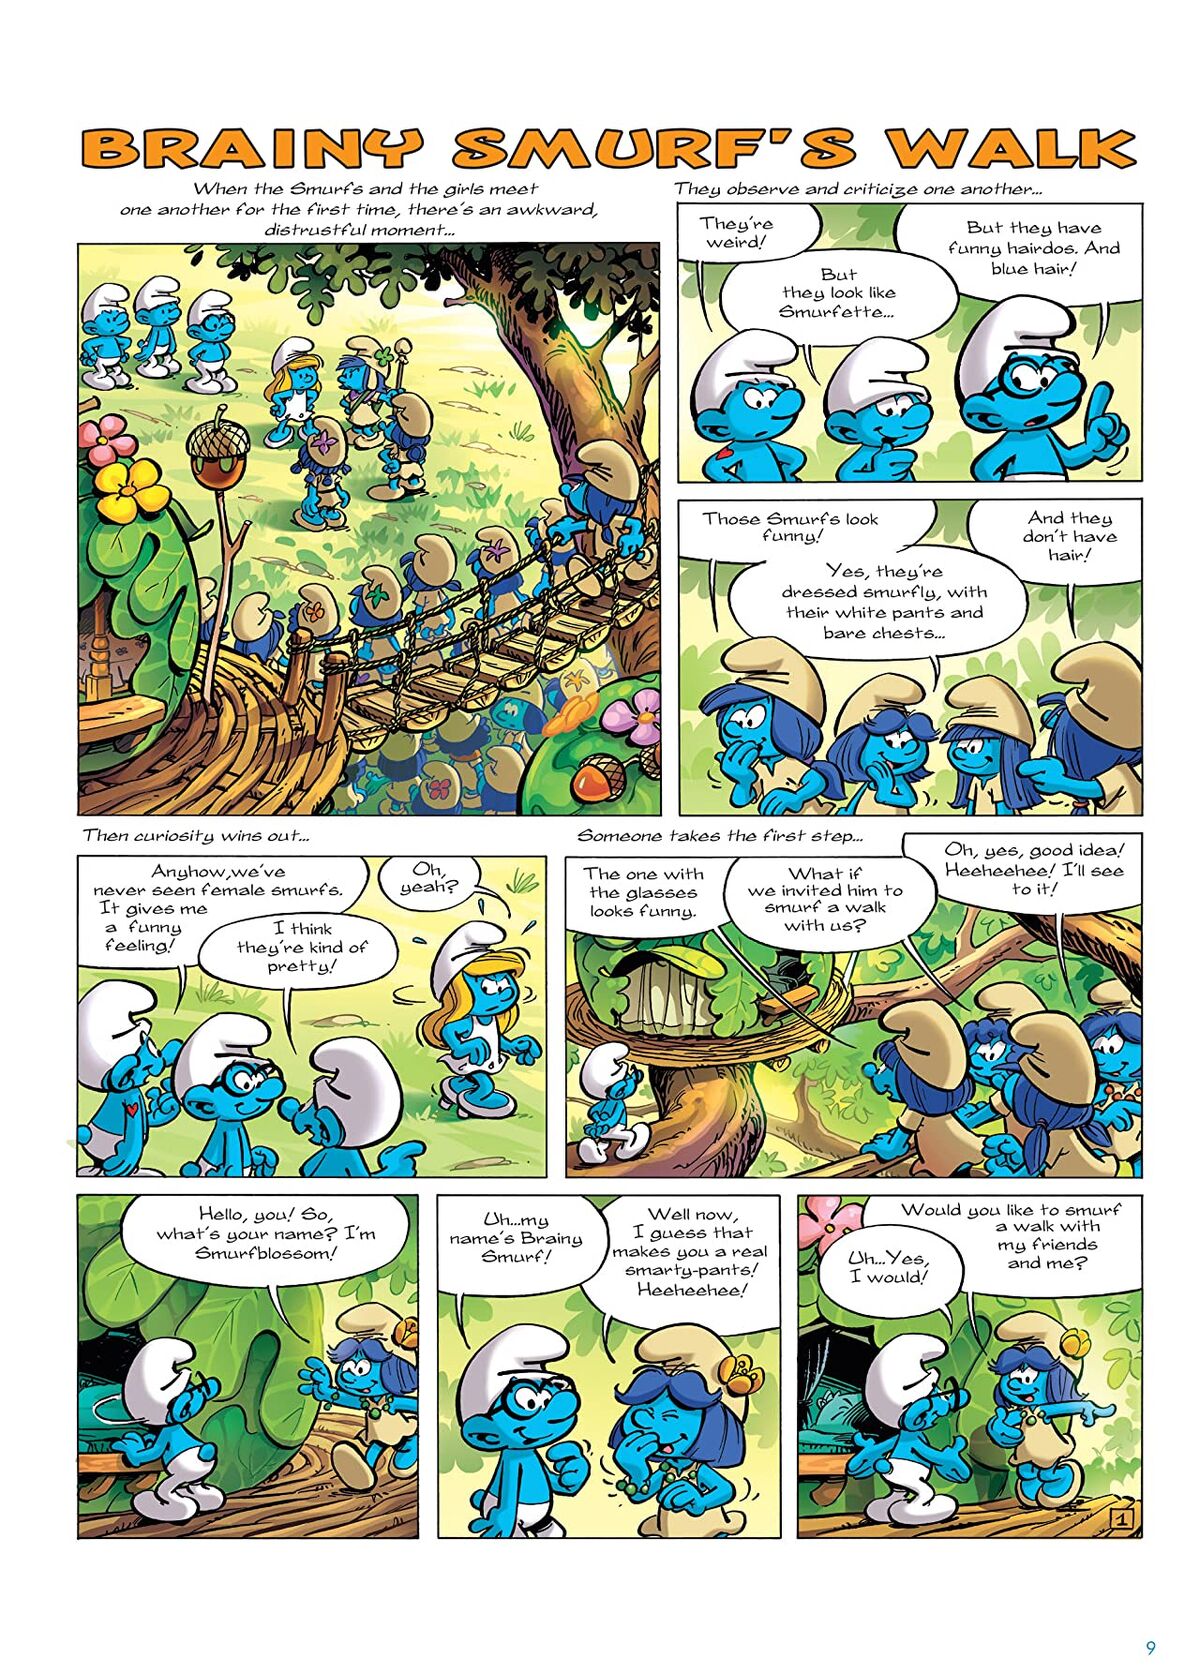 The Smurfs Tales Vol. 3: The Crow in Smurfy Grove and other Tales